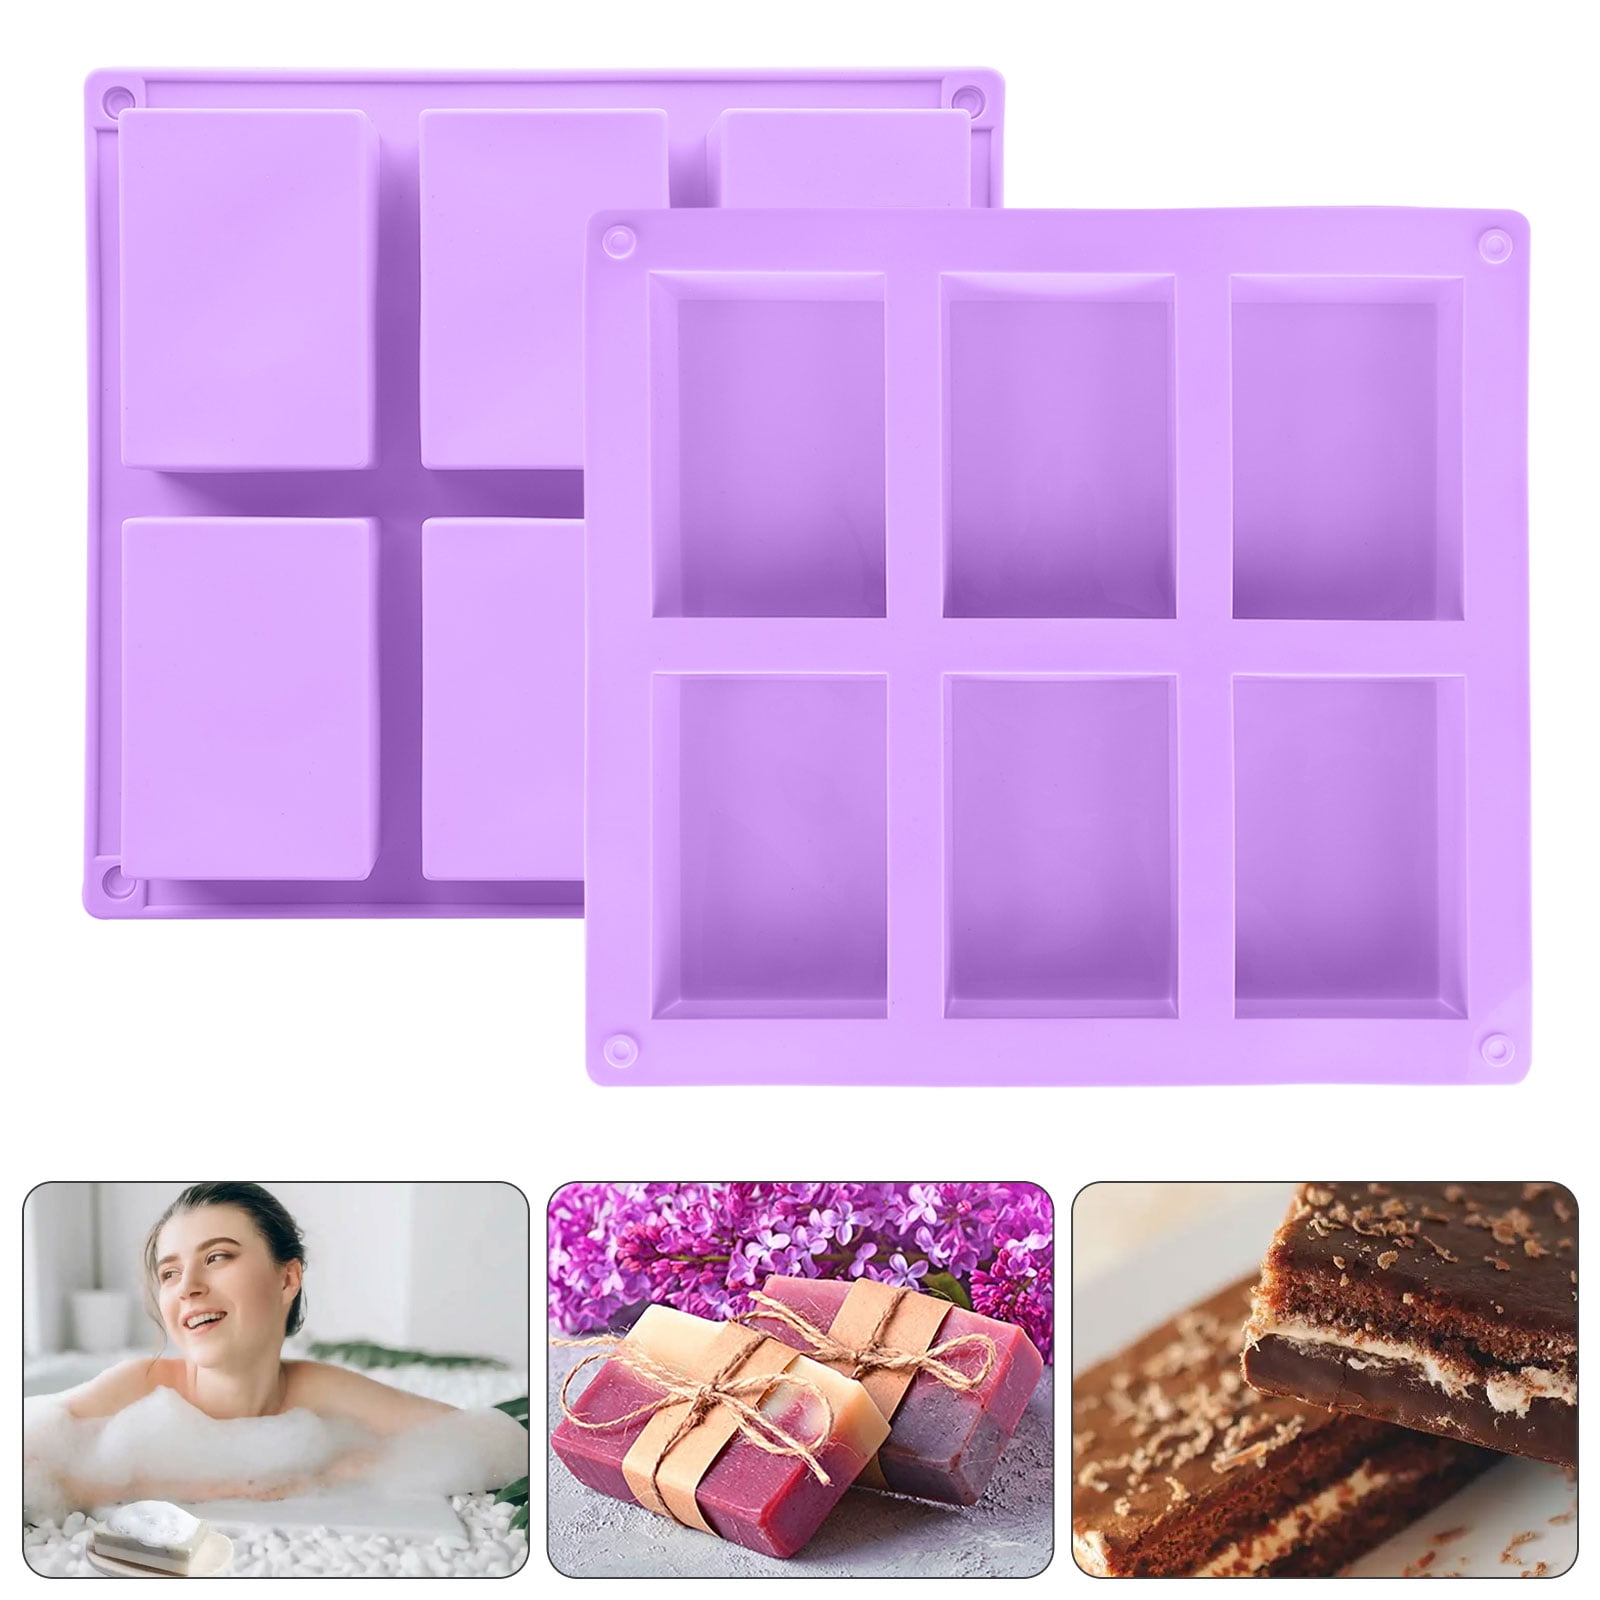 Silicone Soap Molds, 4 Pack Silicone Soap Molds for Soap Making, 6 Cavities  Include Rectangle and Oval Ellipse Shapes, Flower Designs for Handmade Bar